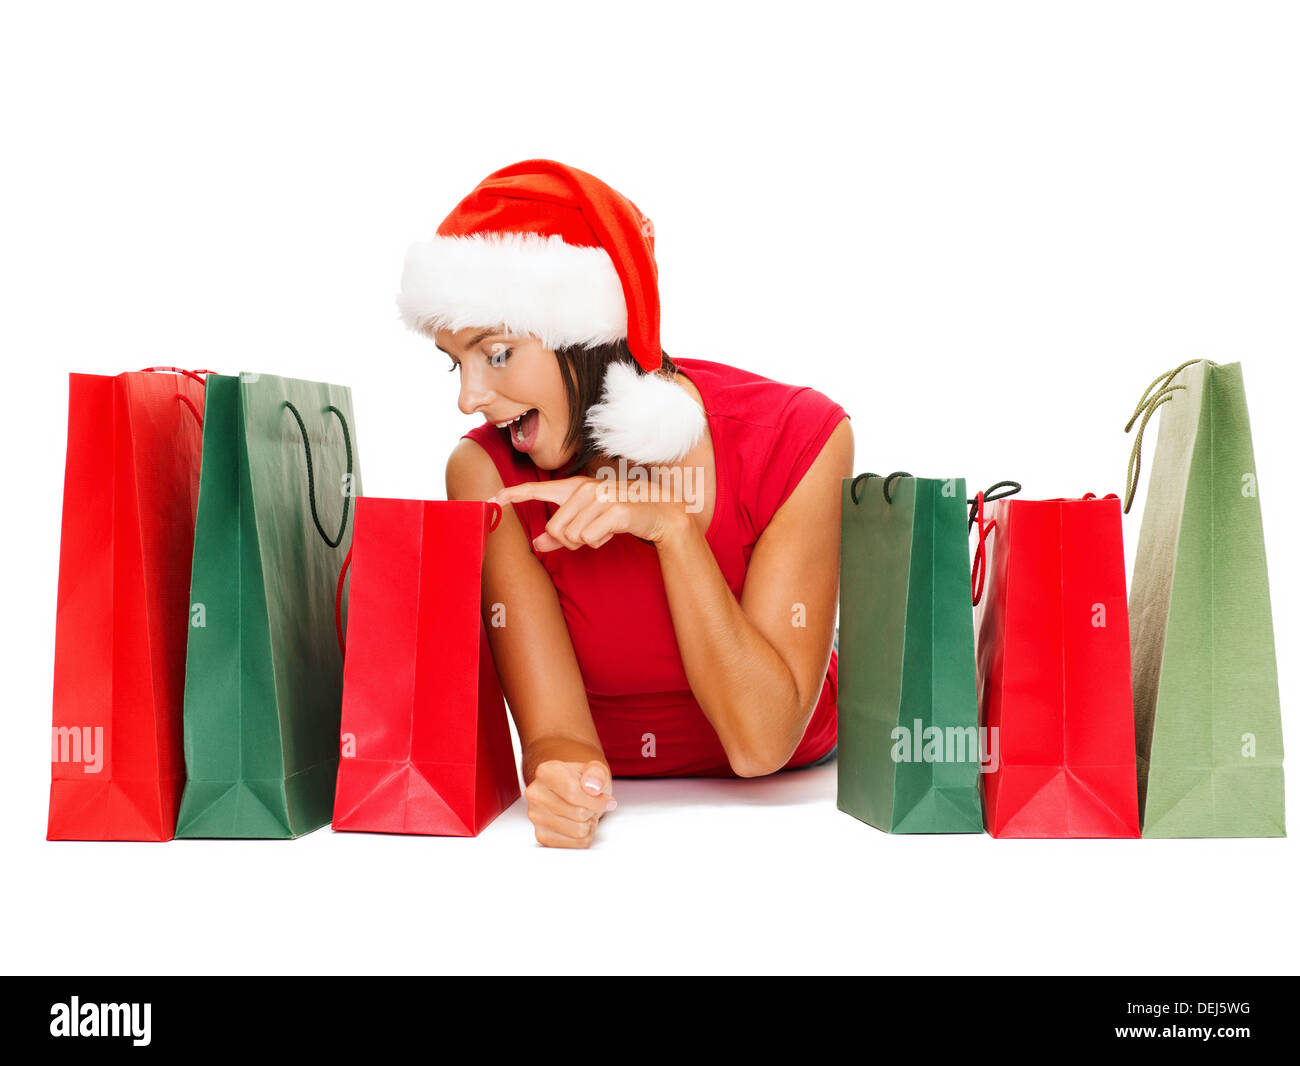 woman in red shirt with shopping bags Stock Photo